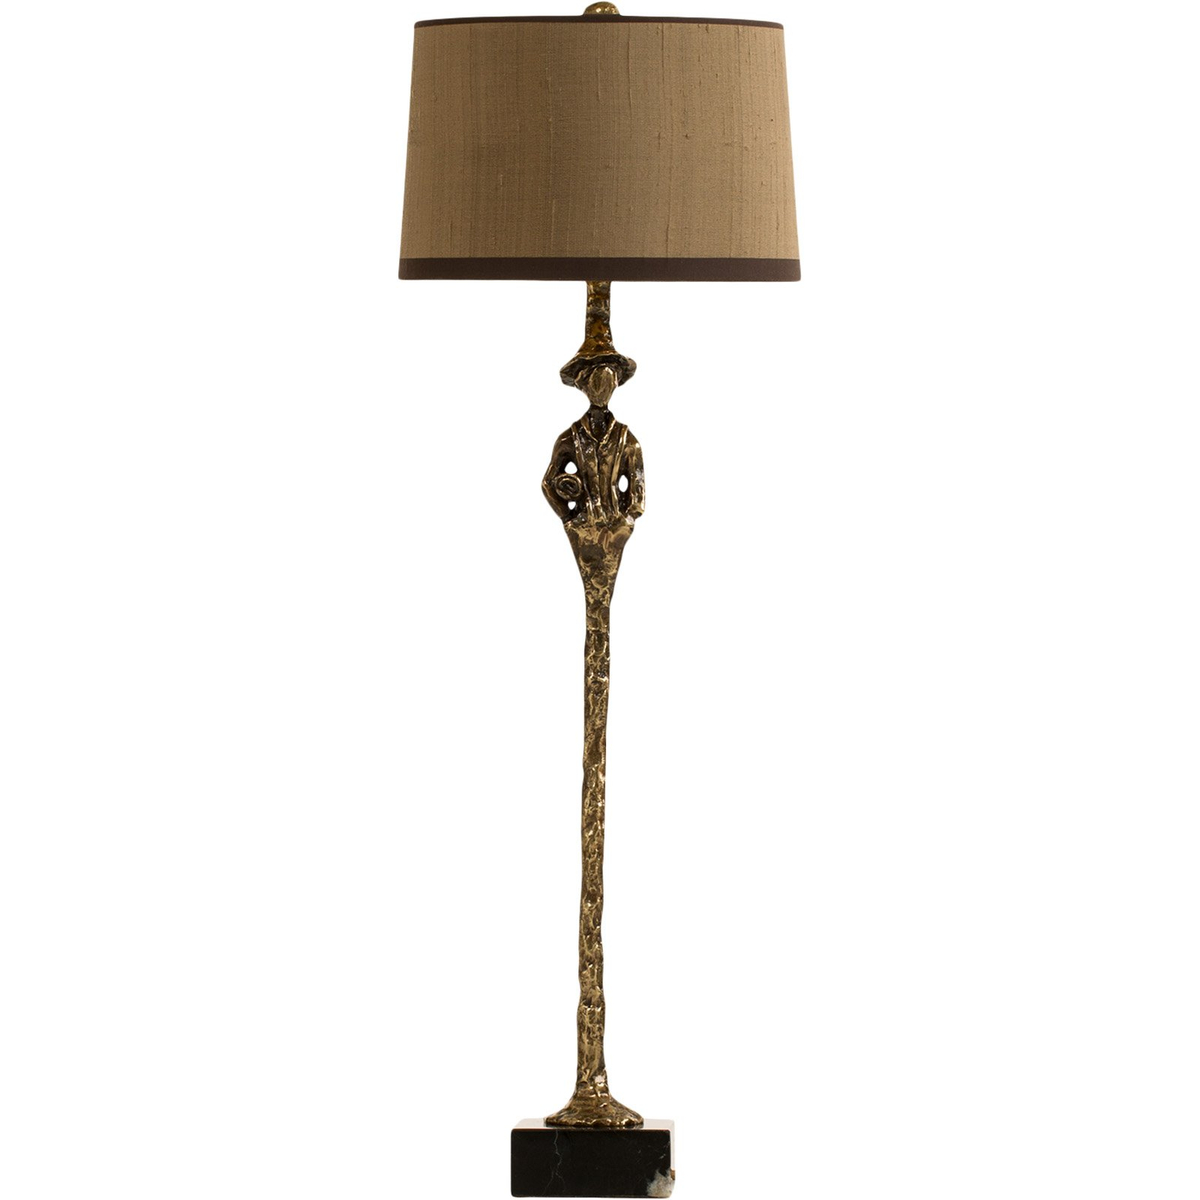 Smoked Brass Afternoon Man Table Lamp